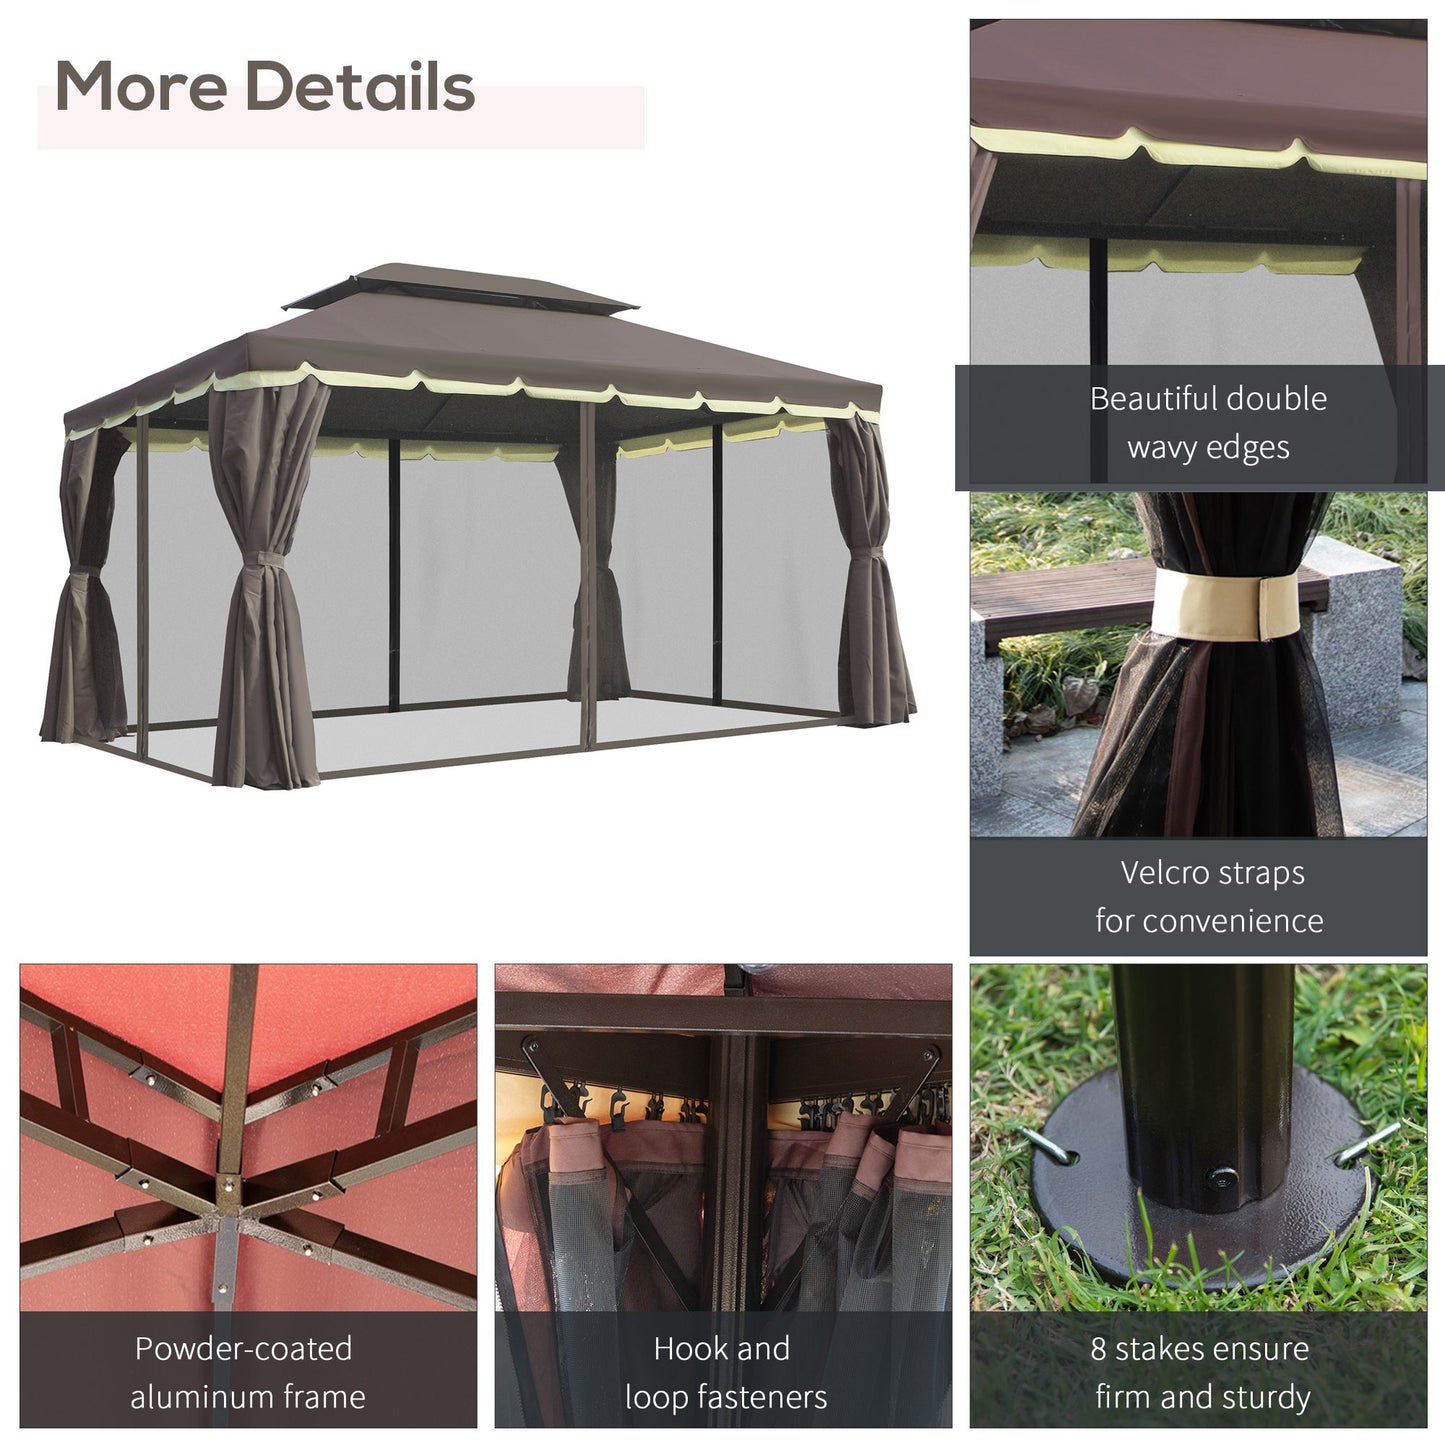 Outsunny Metal Frame Gazebo with Sides 3m x 4m Marquee W/ Sidewalls Coffee Colour Aluminium Metal Canopy Pavilion Patio Garden Party Tent Shelter with Nets and Sidewalls